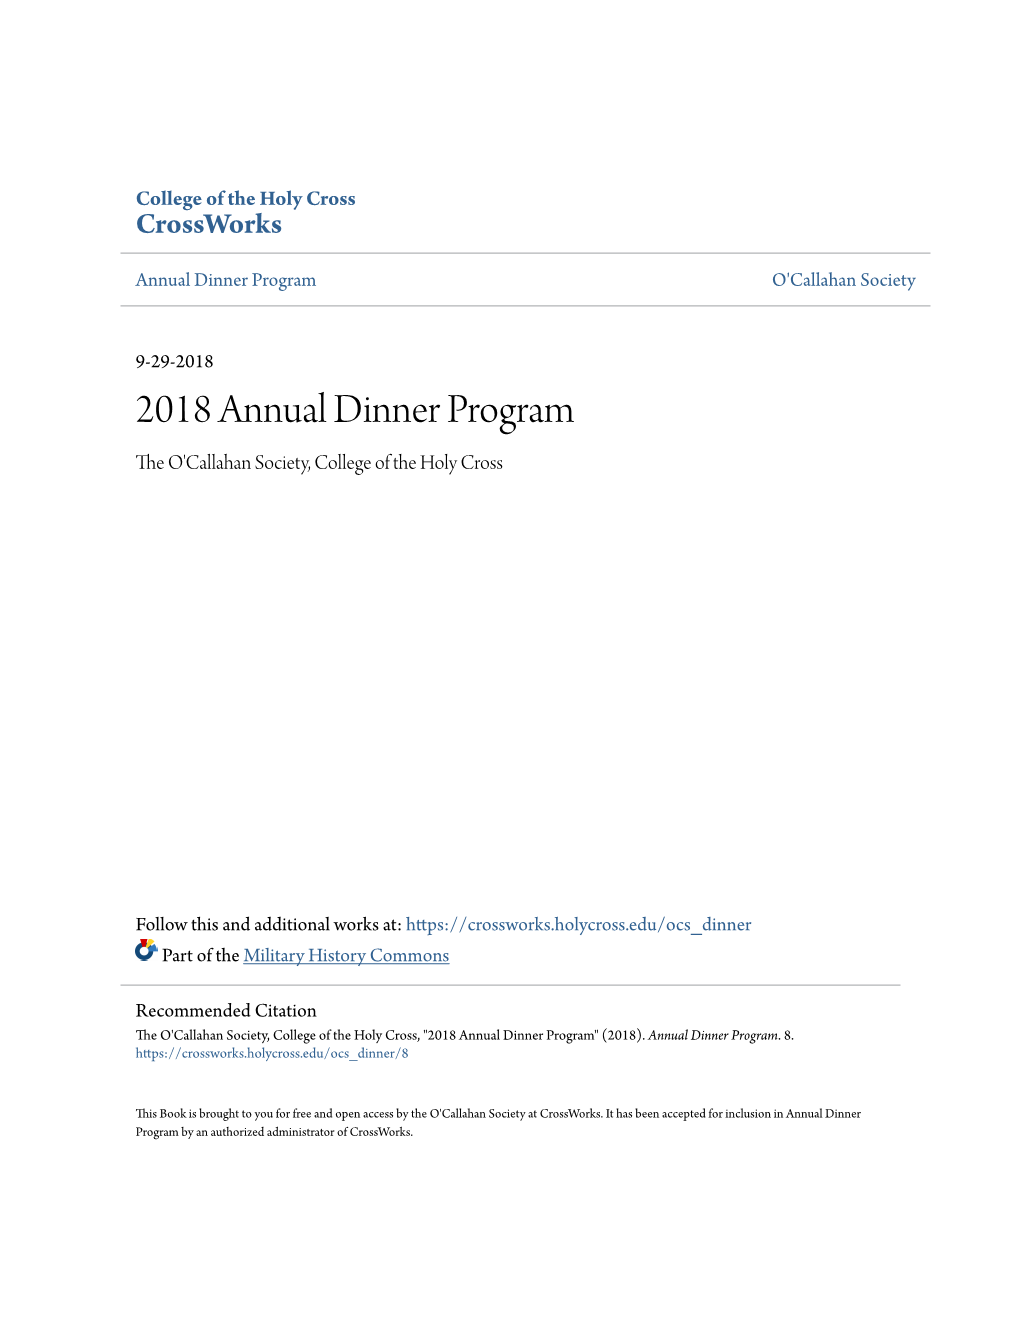 2018 Annual Dinner Program the 'Ocallahan Society, College of the Holy Cross